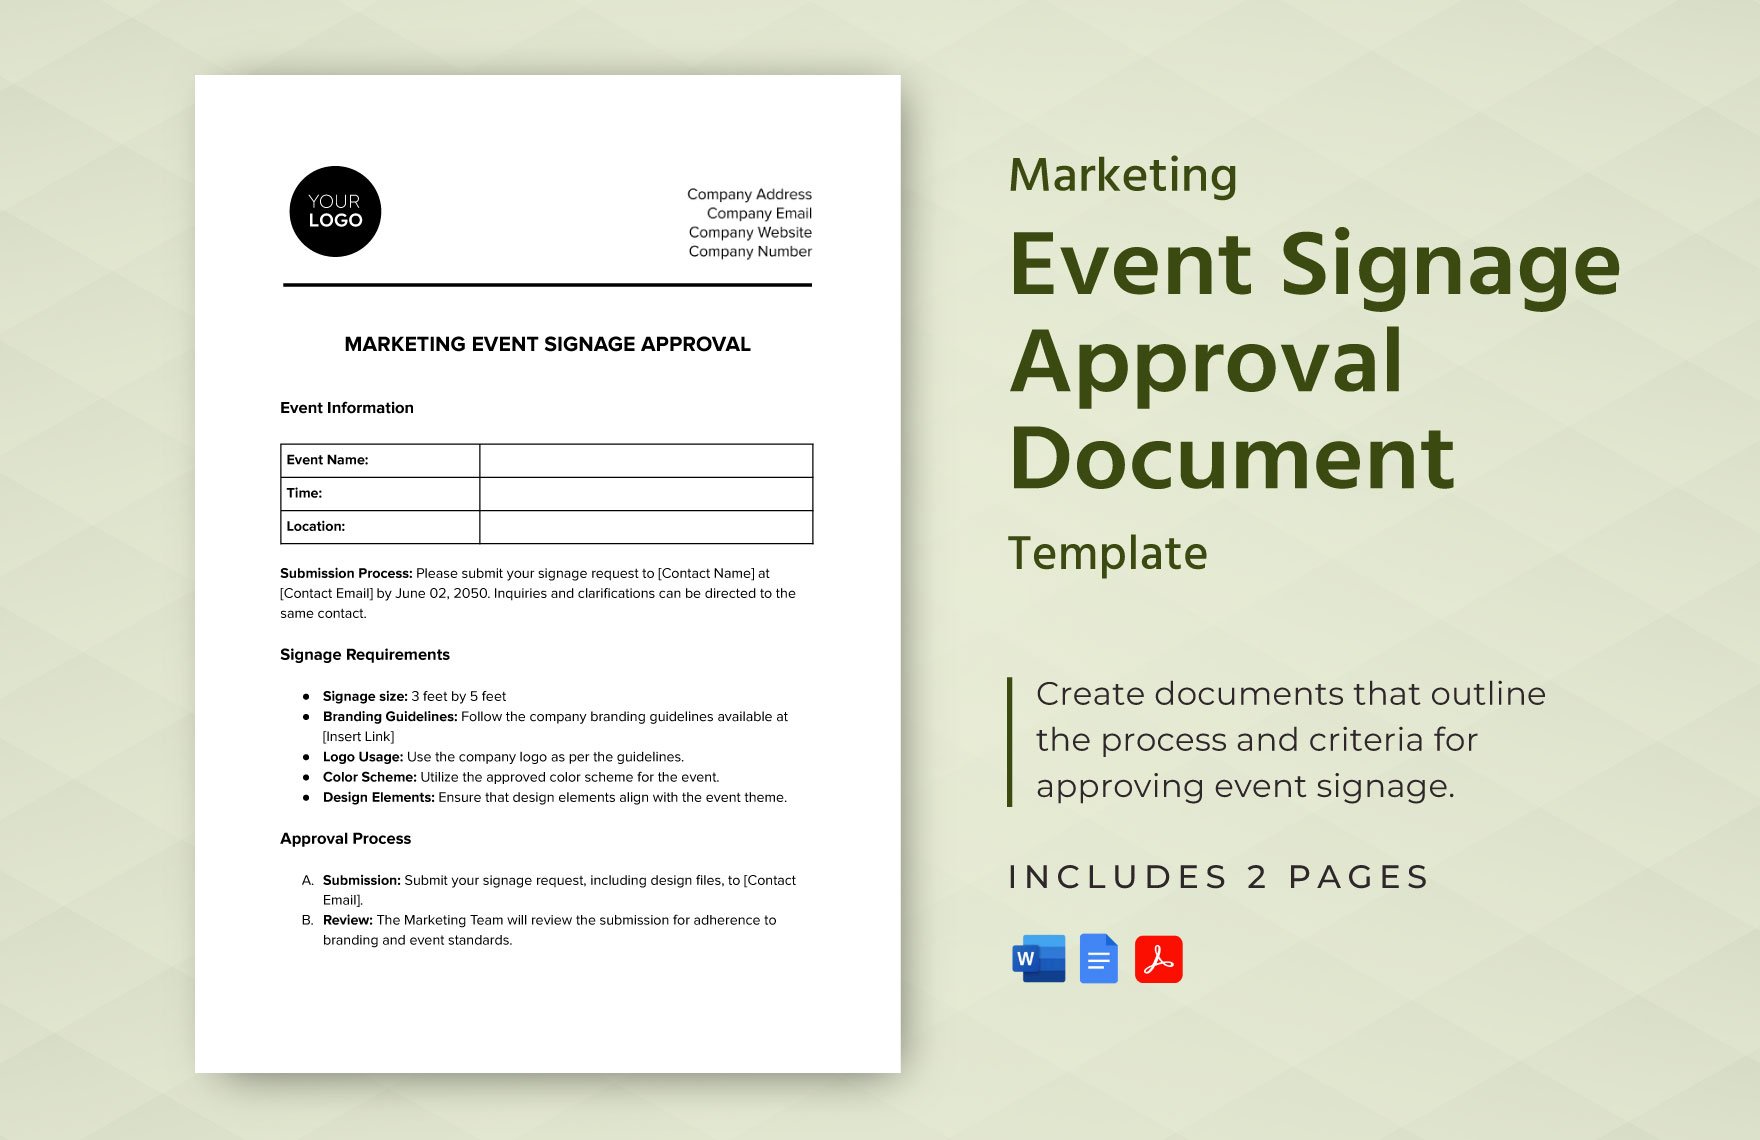 Marketing Event Signage Approval Document Template in Word, Google Docs, PDF